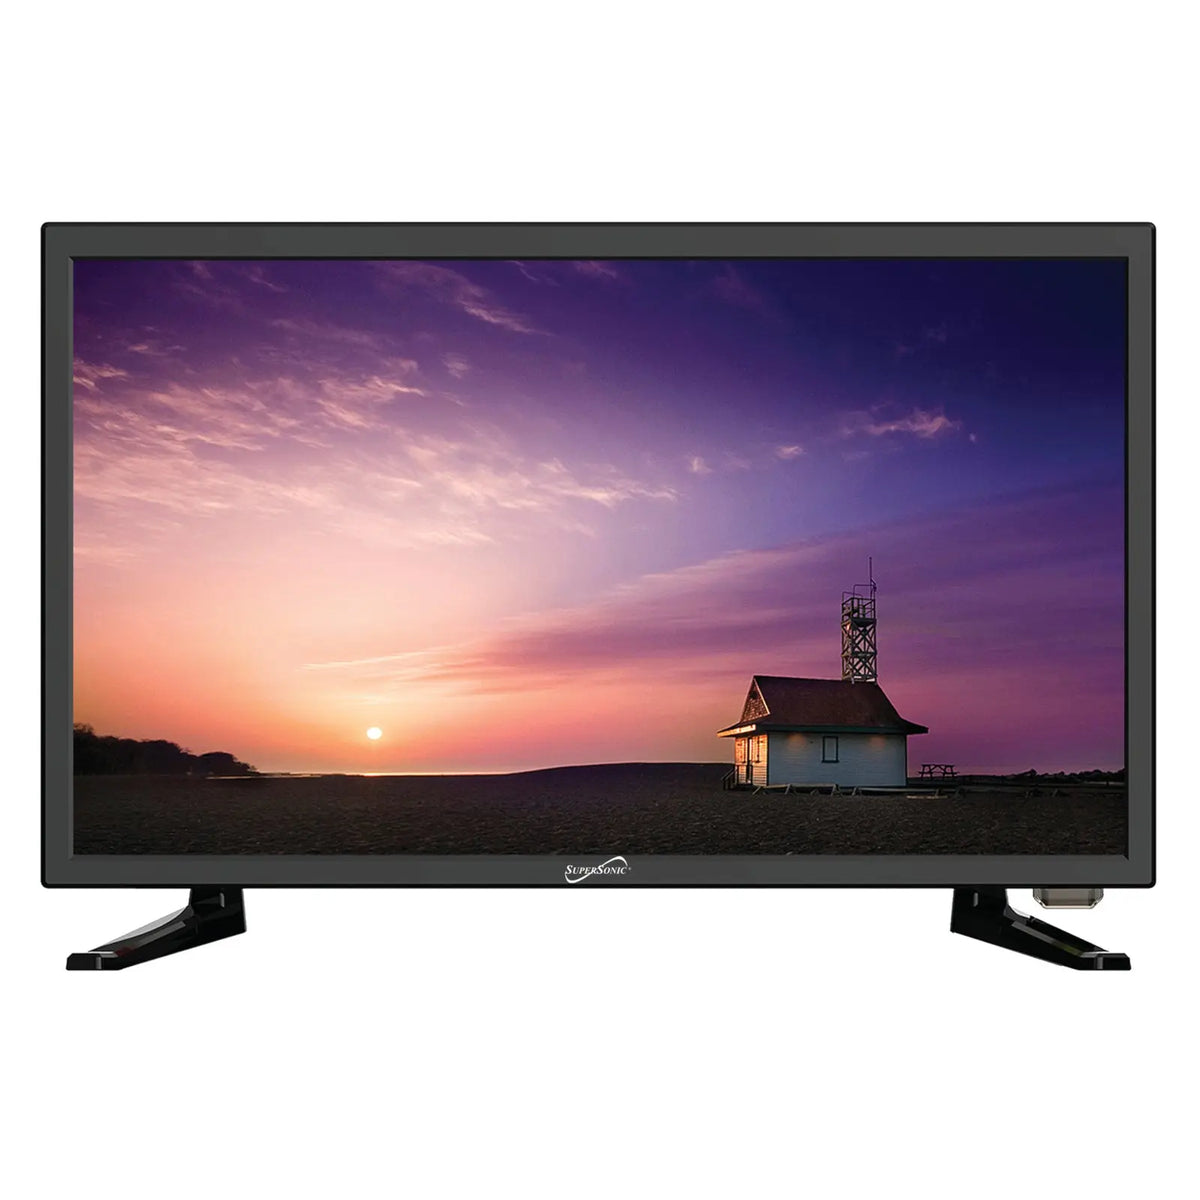 Supersonic SC2816 16 inch Portable LED TV - Black' for sale